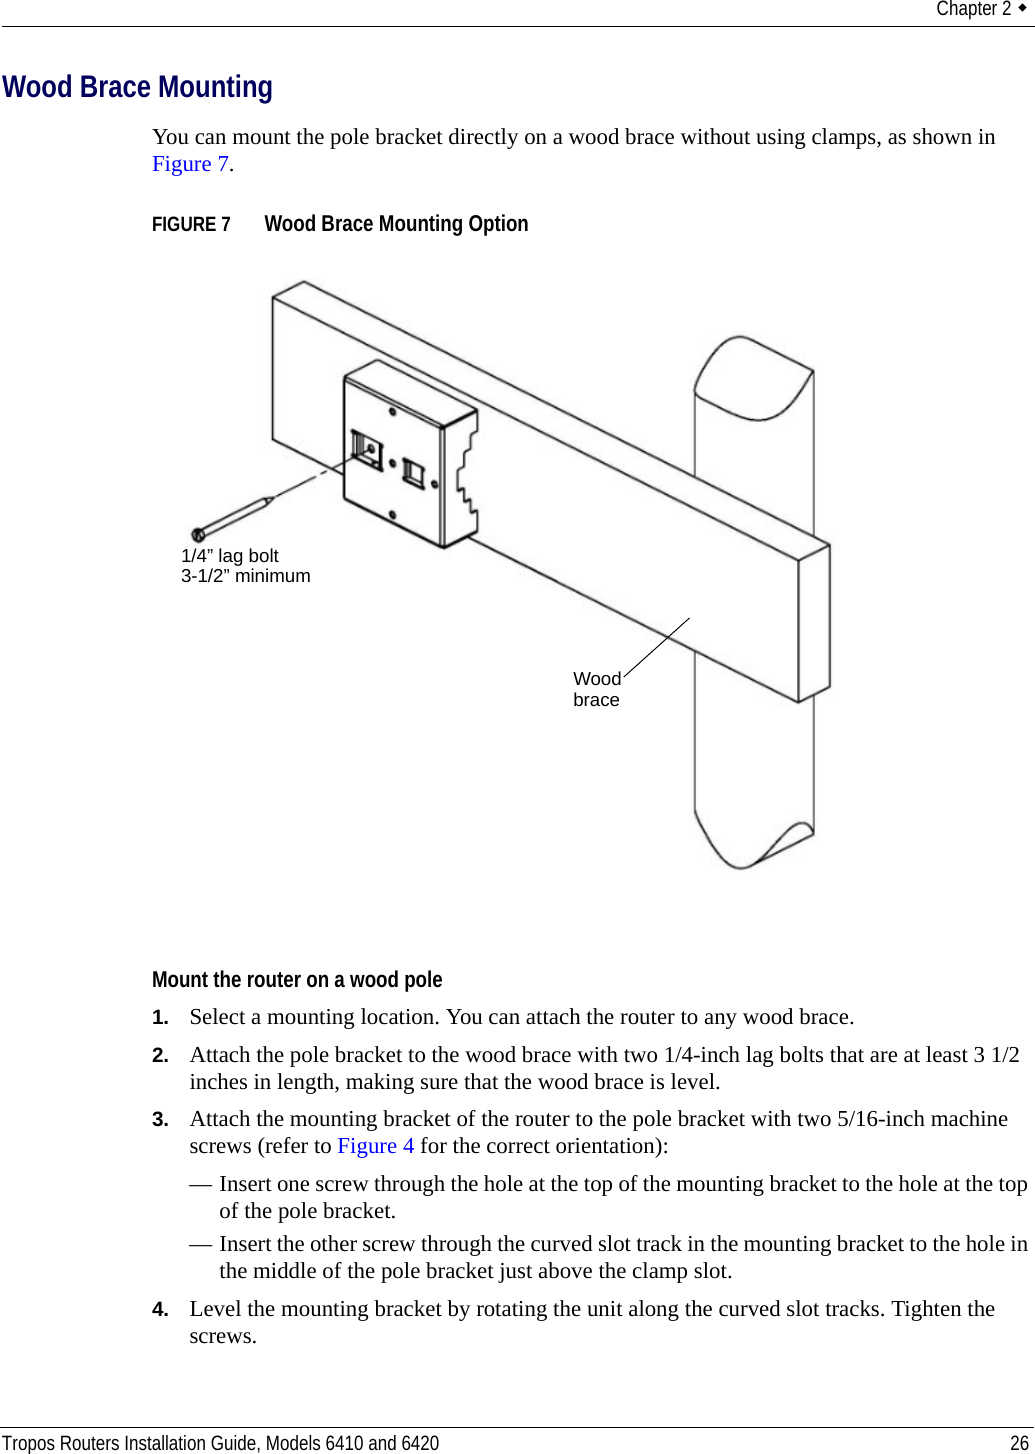 Chapter 2  Tropos Routers Installation Guide, Models 6410 and 6420 26Wood Brace MountingYou can mount the pole bracket directly on a wood brace without using clamps, as shown in Figure 7.FIGURE 7   Wood Brace Mounting OptionMount the router on a wood pole1. Select a mounting location. You can attach the router to any wood brace. 2. Attach the pole bracket to the wood brace with two 1/4-inch lag bolts that are at least 3 1/2 inches in length, making sure that the wood brace is level. 3. Attach the mounting bracket of the router to the pole bracket with two 5/16-inch machine screws (refer to Figure 4 for the correct orientation):— Insert one screw through the hole at the top of the mounting bracket to the hole at the top of the pole bracket.— Insert the other screw through the curved slot track in the mounting bracket to the hole in the middle of the pole bracket just above the clamp slot.4. Level the mounting bracket by rotating the unit along the curved slot tracks. Tighten the screws.Wood brace1/4” lag bolt3-1/2” minimum